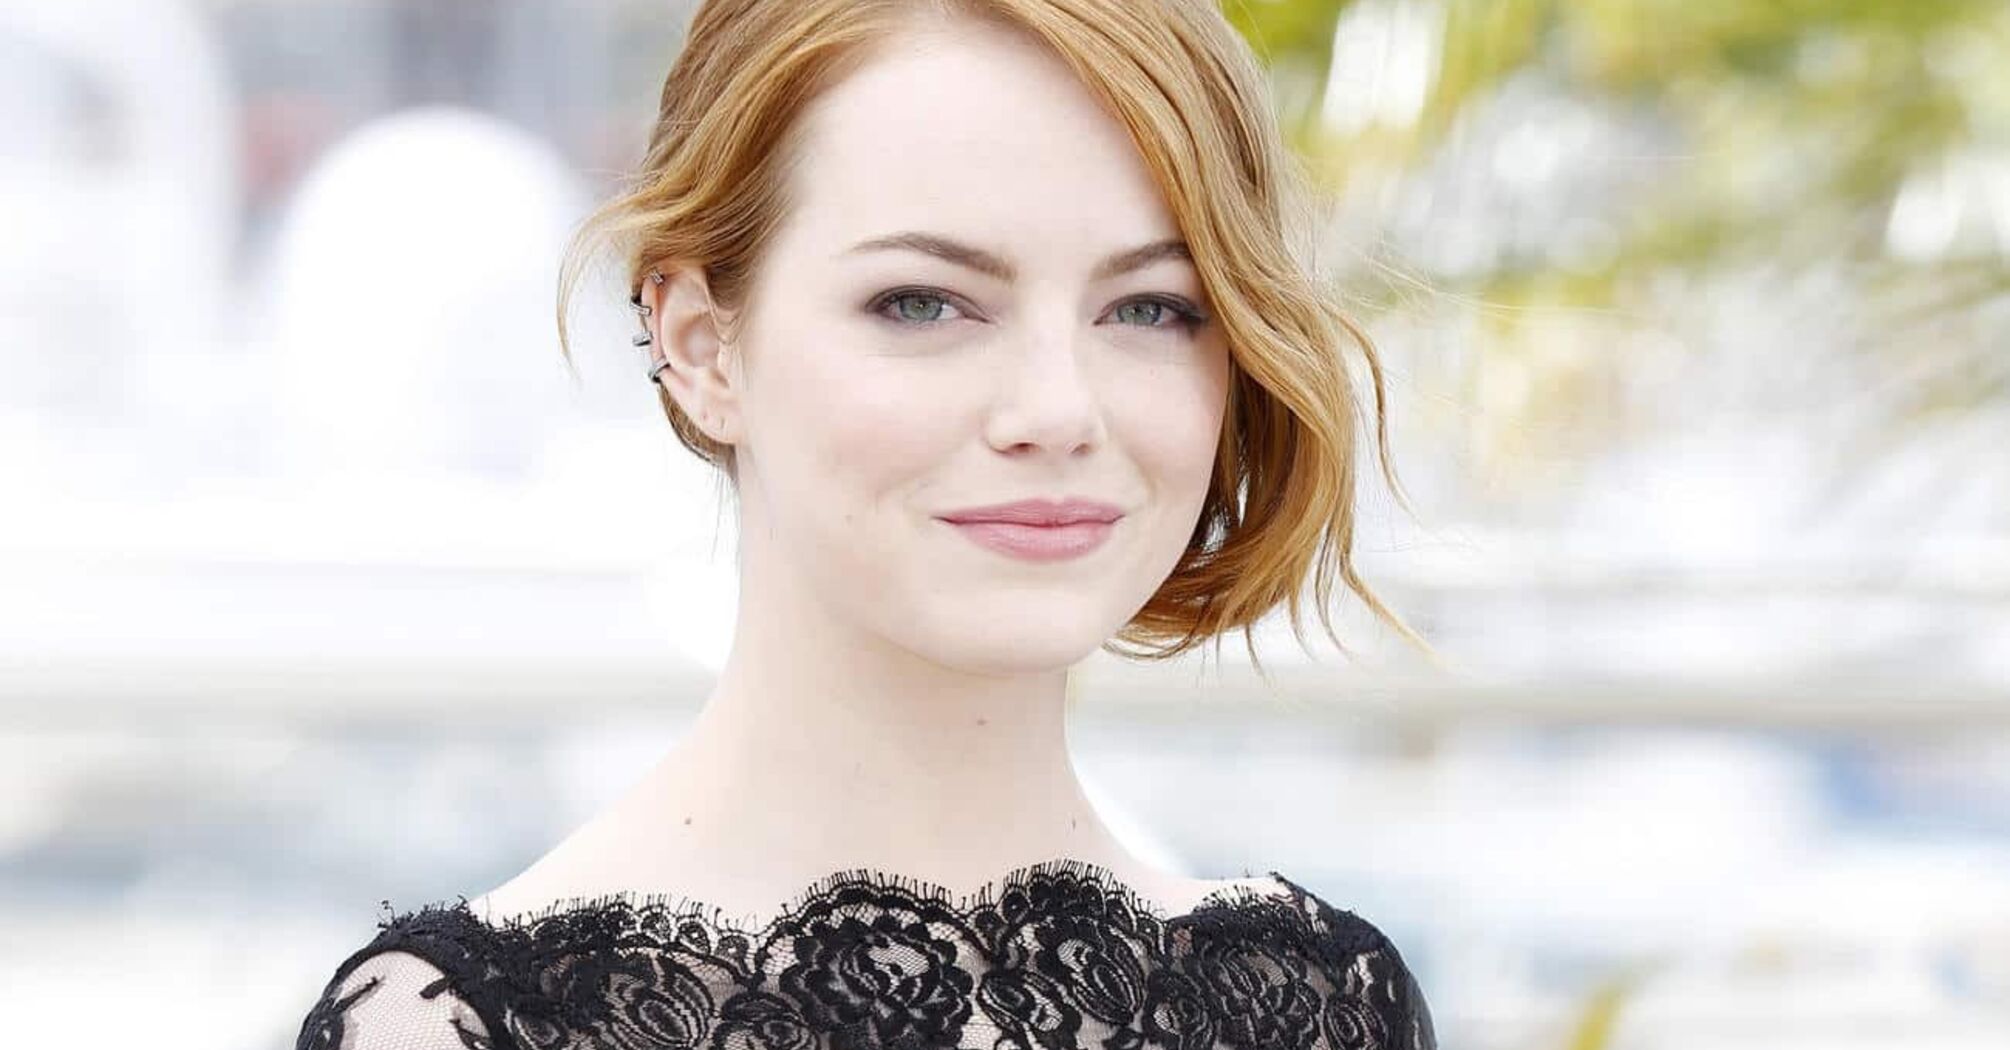 10 Fascinating Facts about Emma Stone